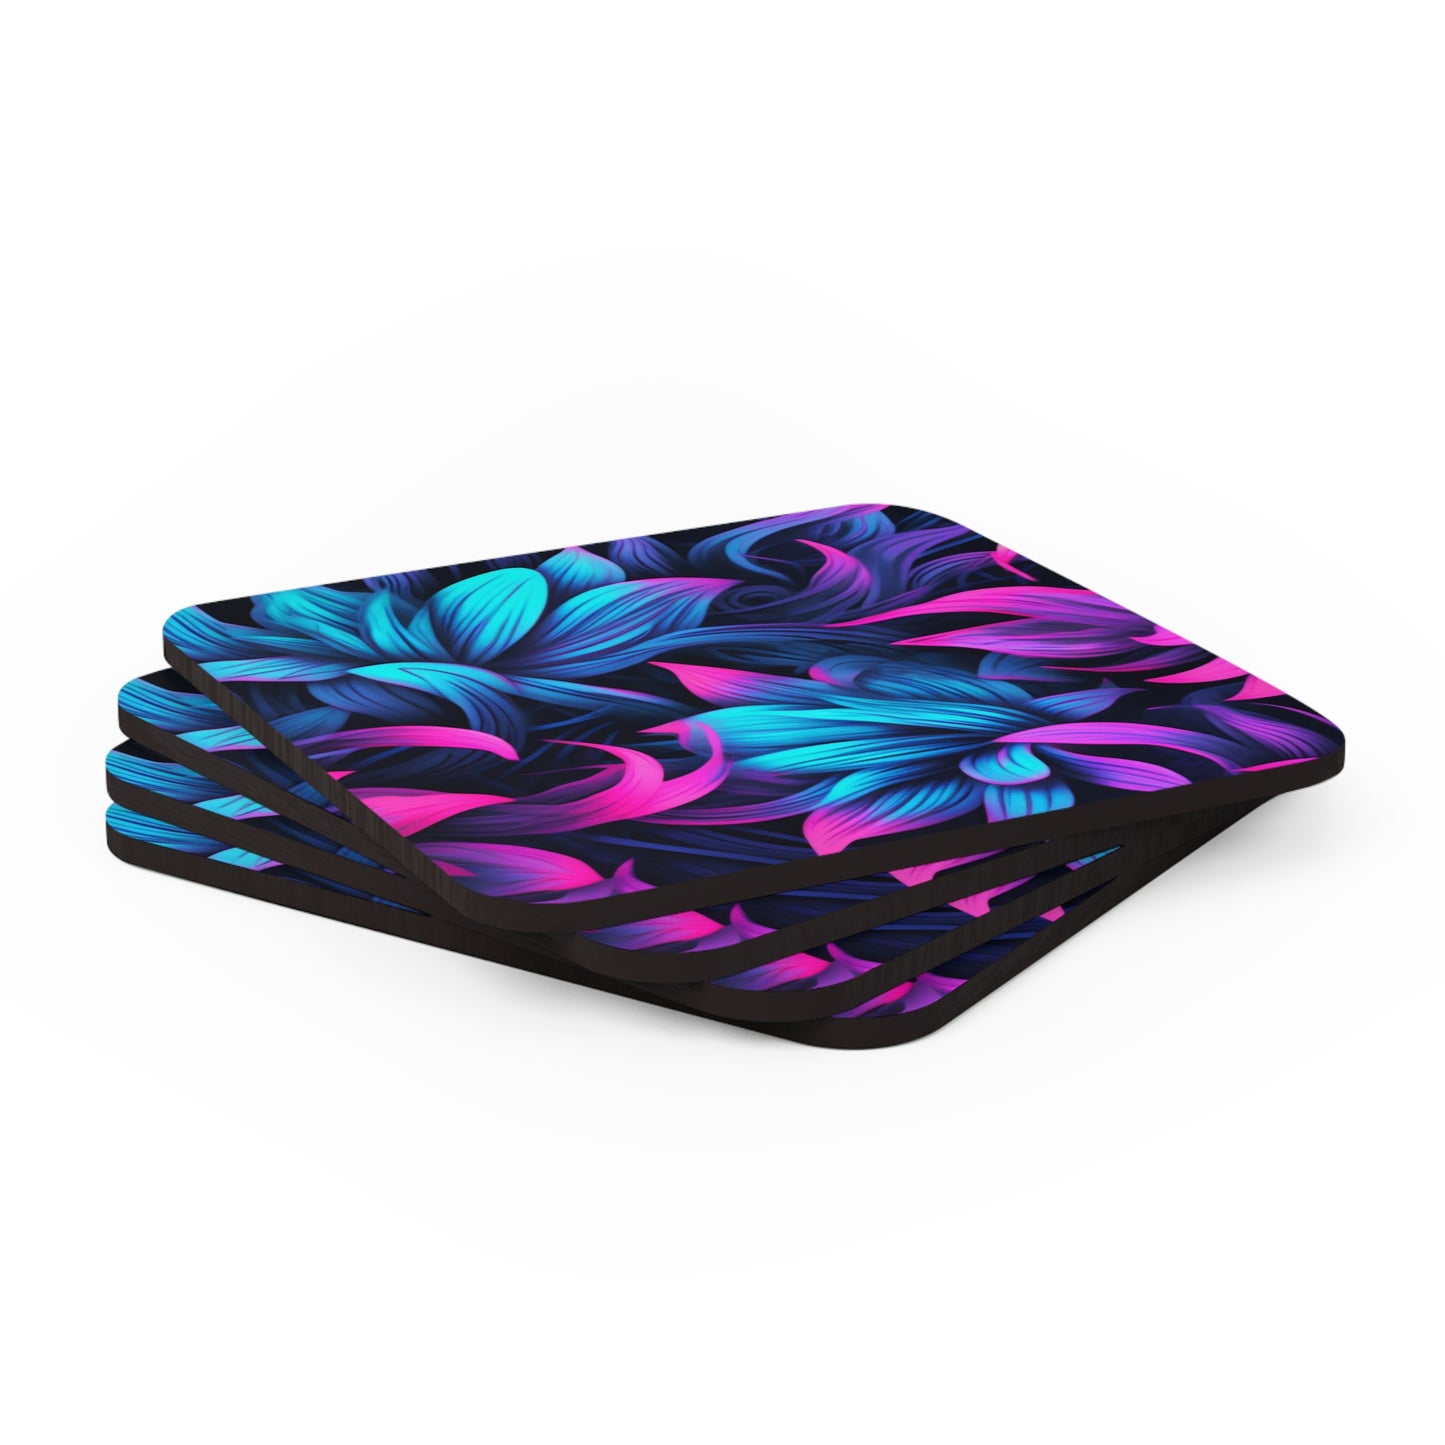 Synthwave Flowers Coaster Set of 4, Vaporwave Retro 80s Floral Coffee Cup Mats, Neon Pink Blue Coffee Table Decor, Groovy Vibrant Coasters